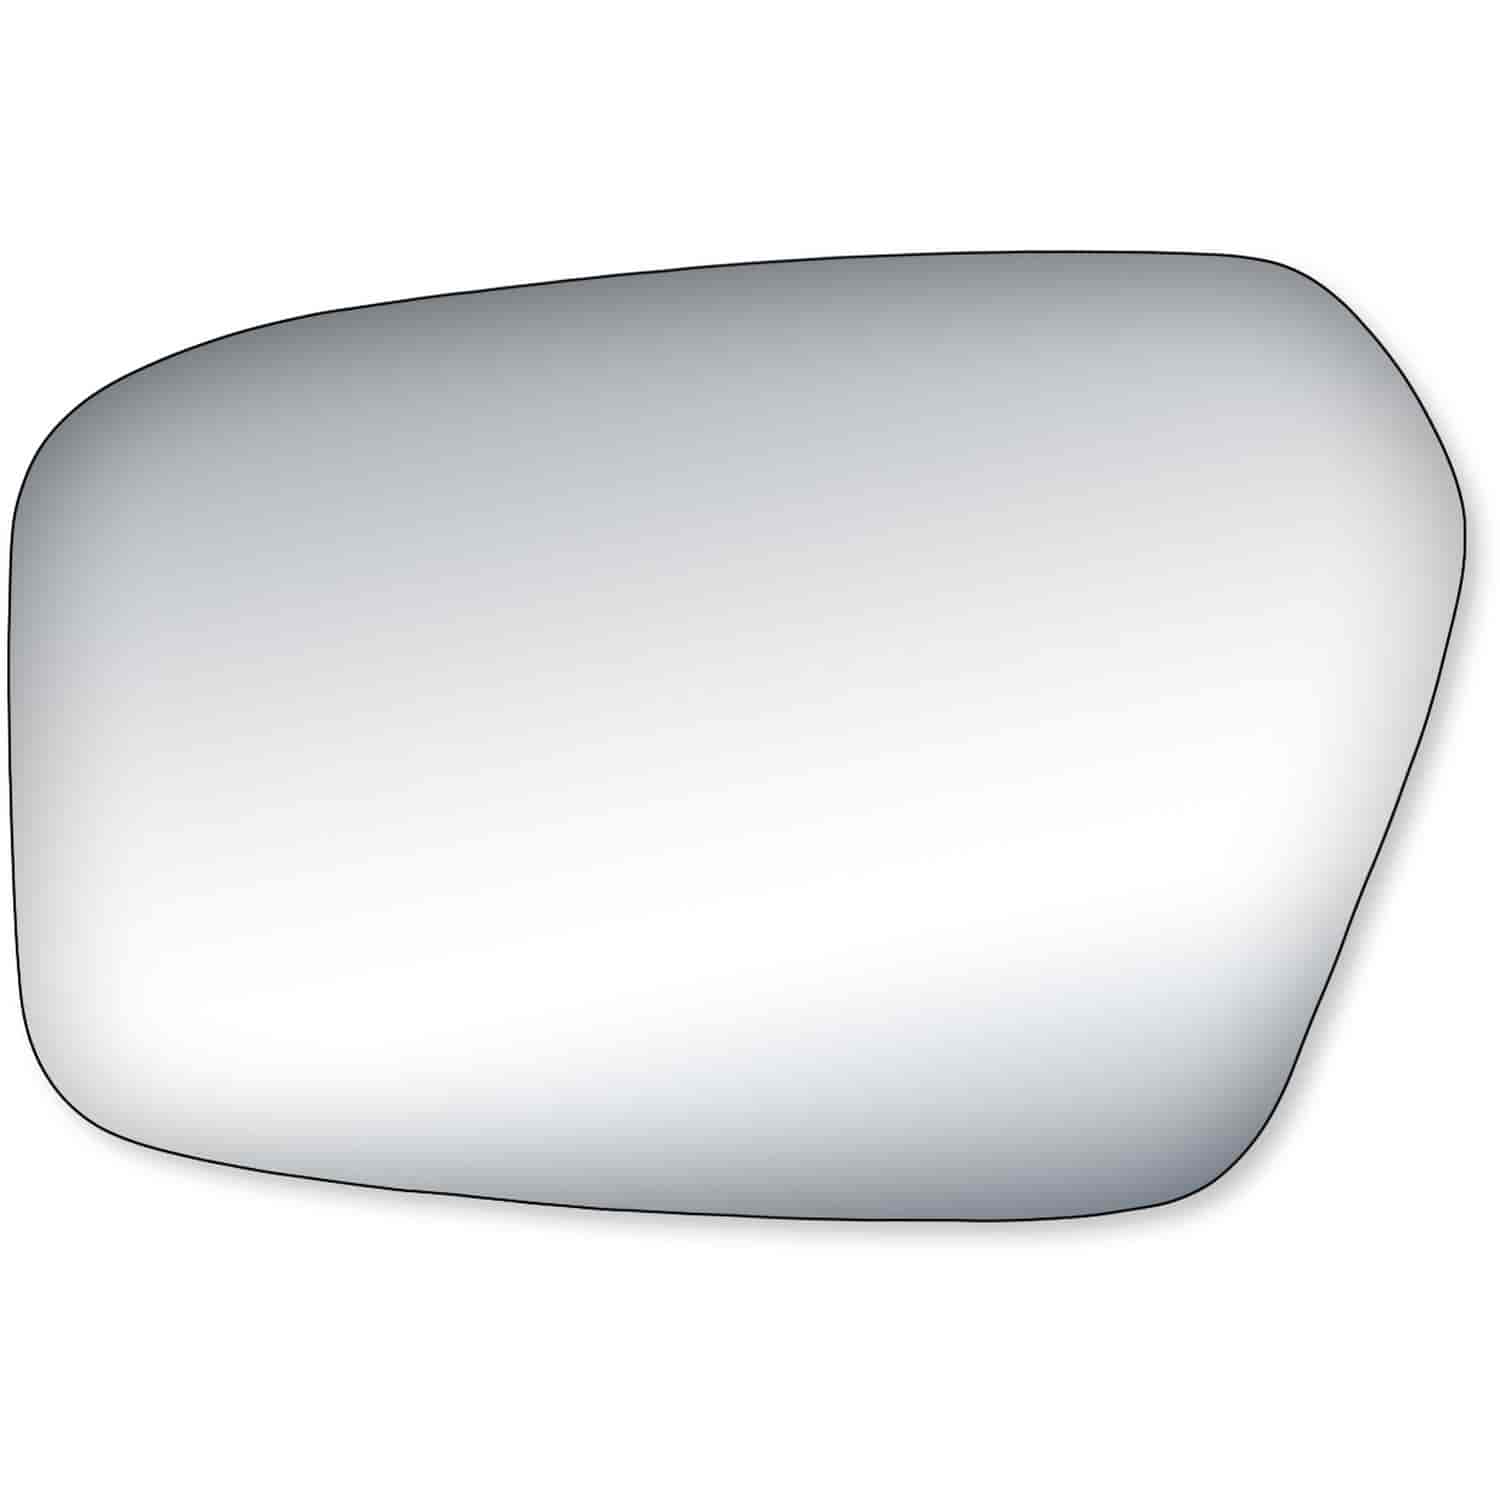 Replacement Glass for 06-10 Fusion; 06-10 MKZ; 06-10 Zephyr; 06-10 Milan w/out blind spot lens ; 10